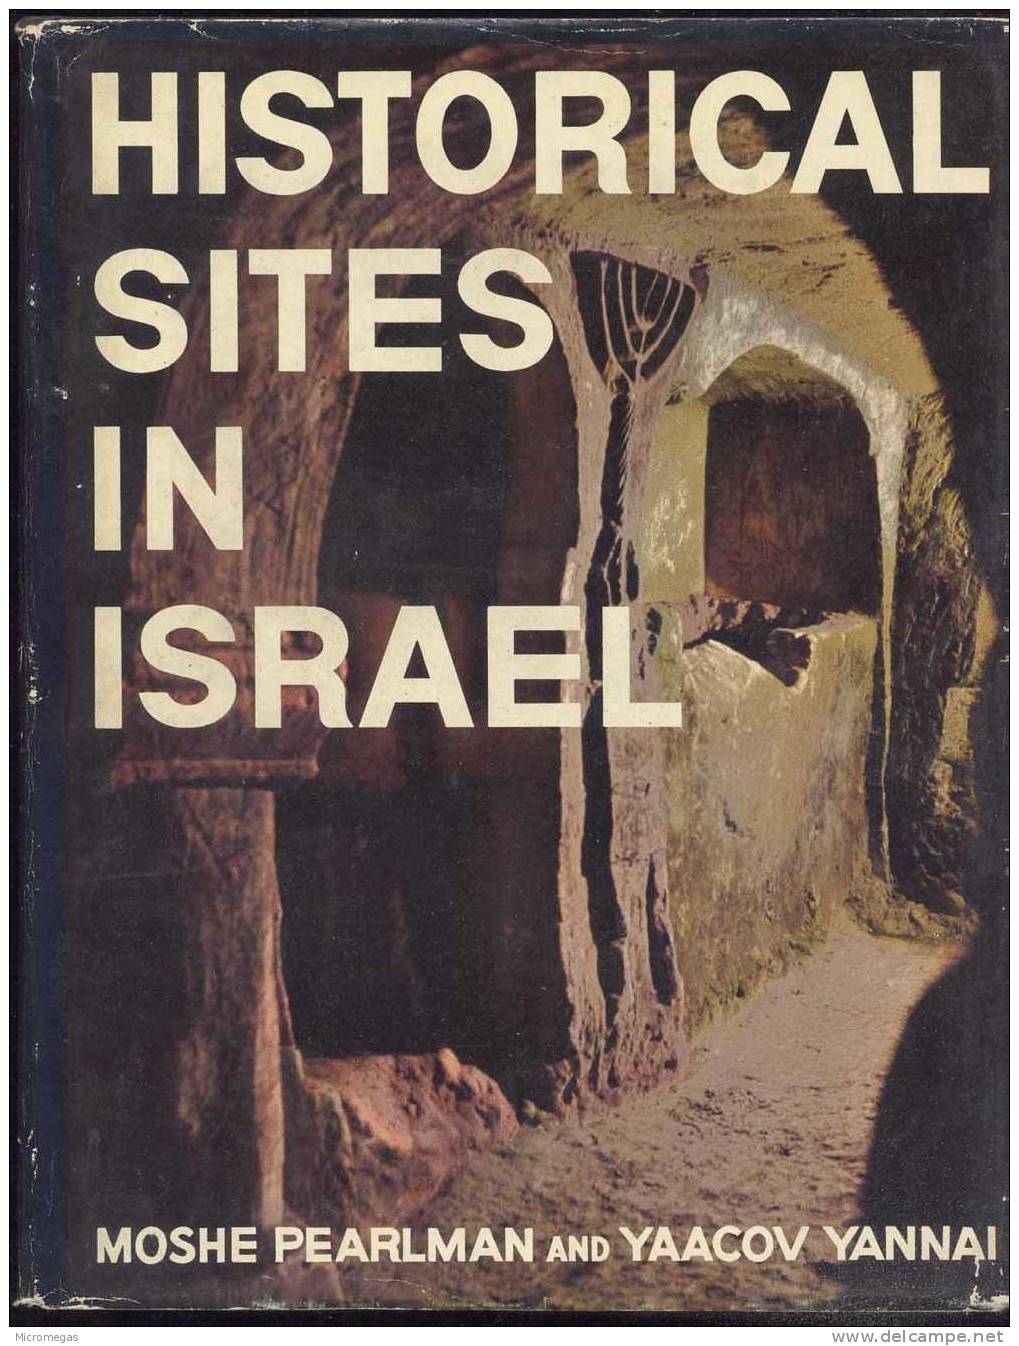 Historical Sites In Israel - Moshe Pearlman And Yaccov Yannai - Middle East